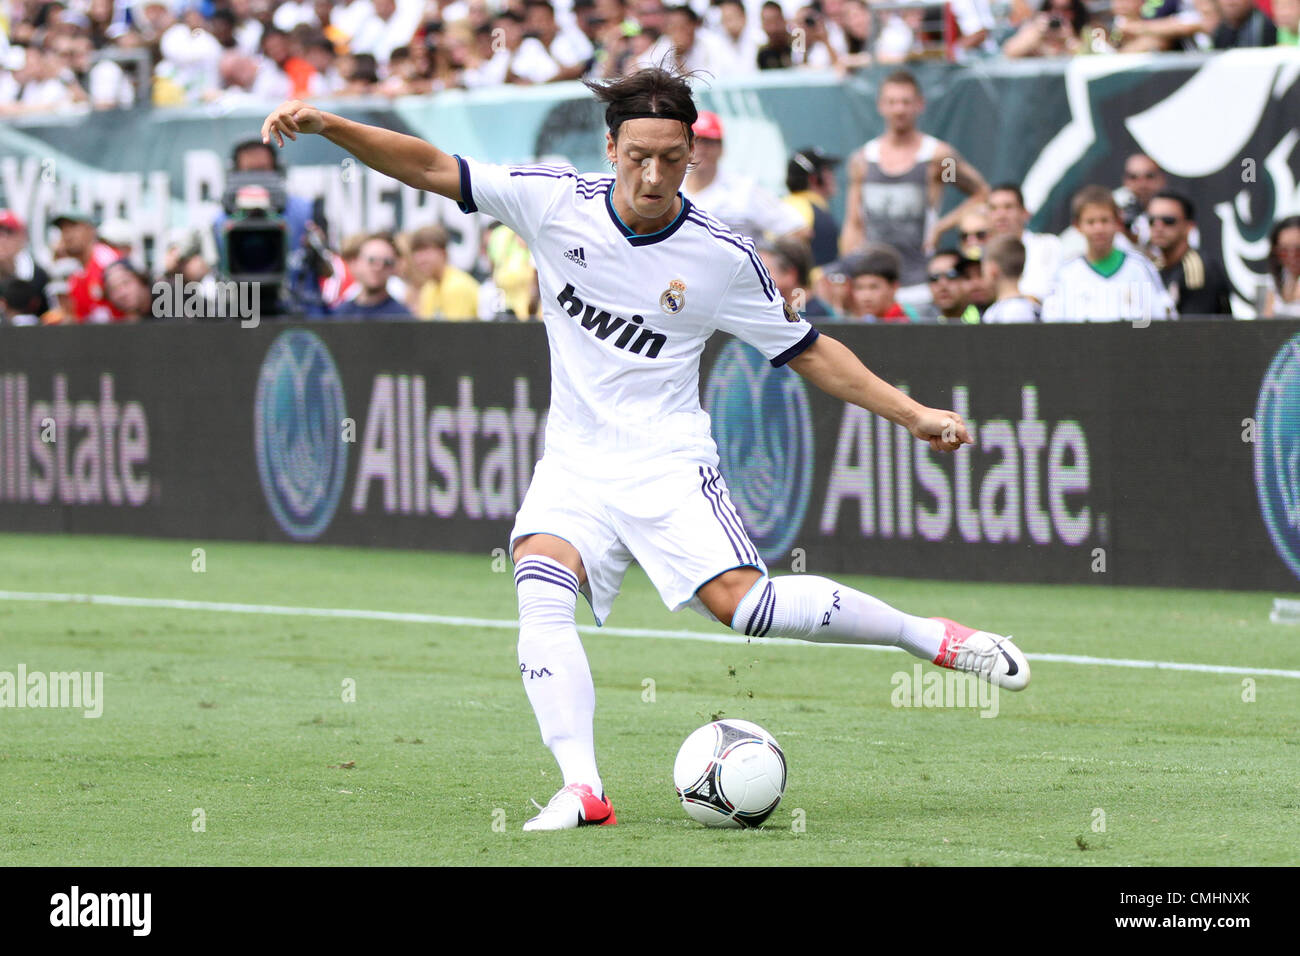 11.08.2012. Philadelphia, USA.  Real Madrid midfielder Mesut Ozil (10) kicks the ball on net during the World Football Challenge match between Real Madrid and Celtic FC at Lincoln Financial Field in Philadelphia, PA. Real Madrid defeated Celtic 2-0. Stock Photo